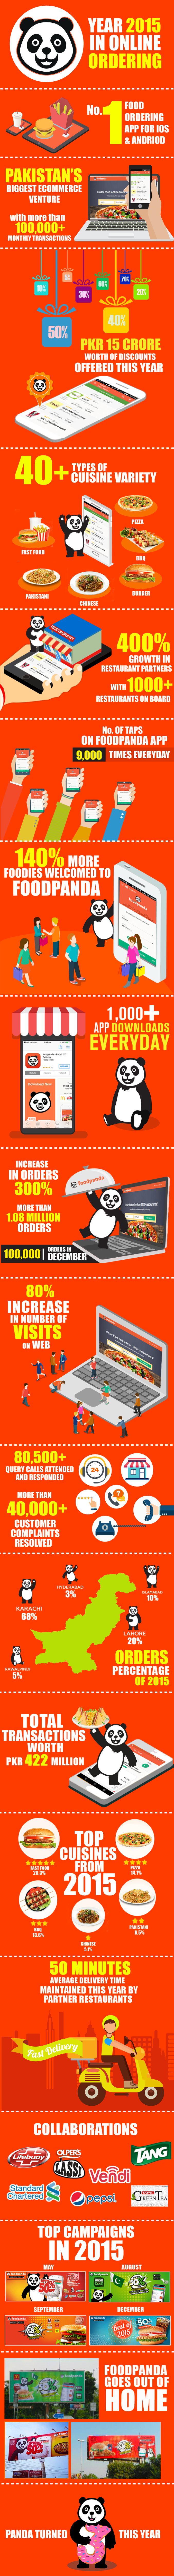 How was the Year 2015 for Online Food Ordering Giant?